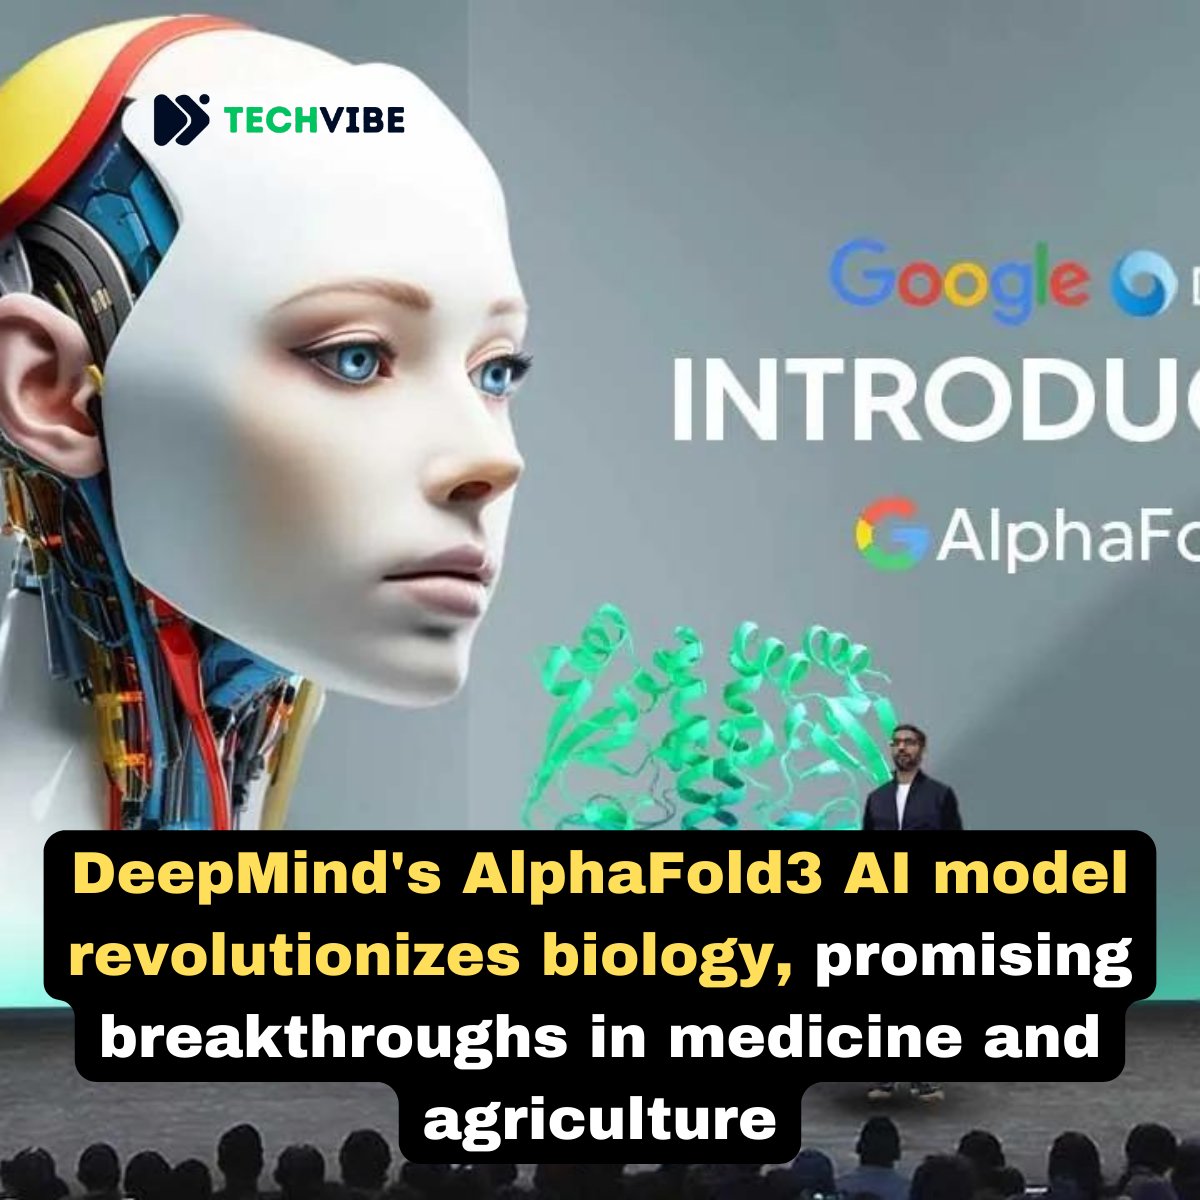 AlphaFold3 AI: Transforming Biology for Medicine and Agriculture with Accurate Molecular Predictions. more: t.ly/3GVGV #Alphafold3 #Deepmind #Google #AI